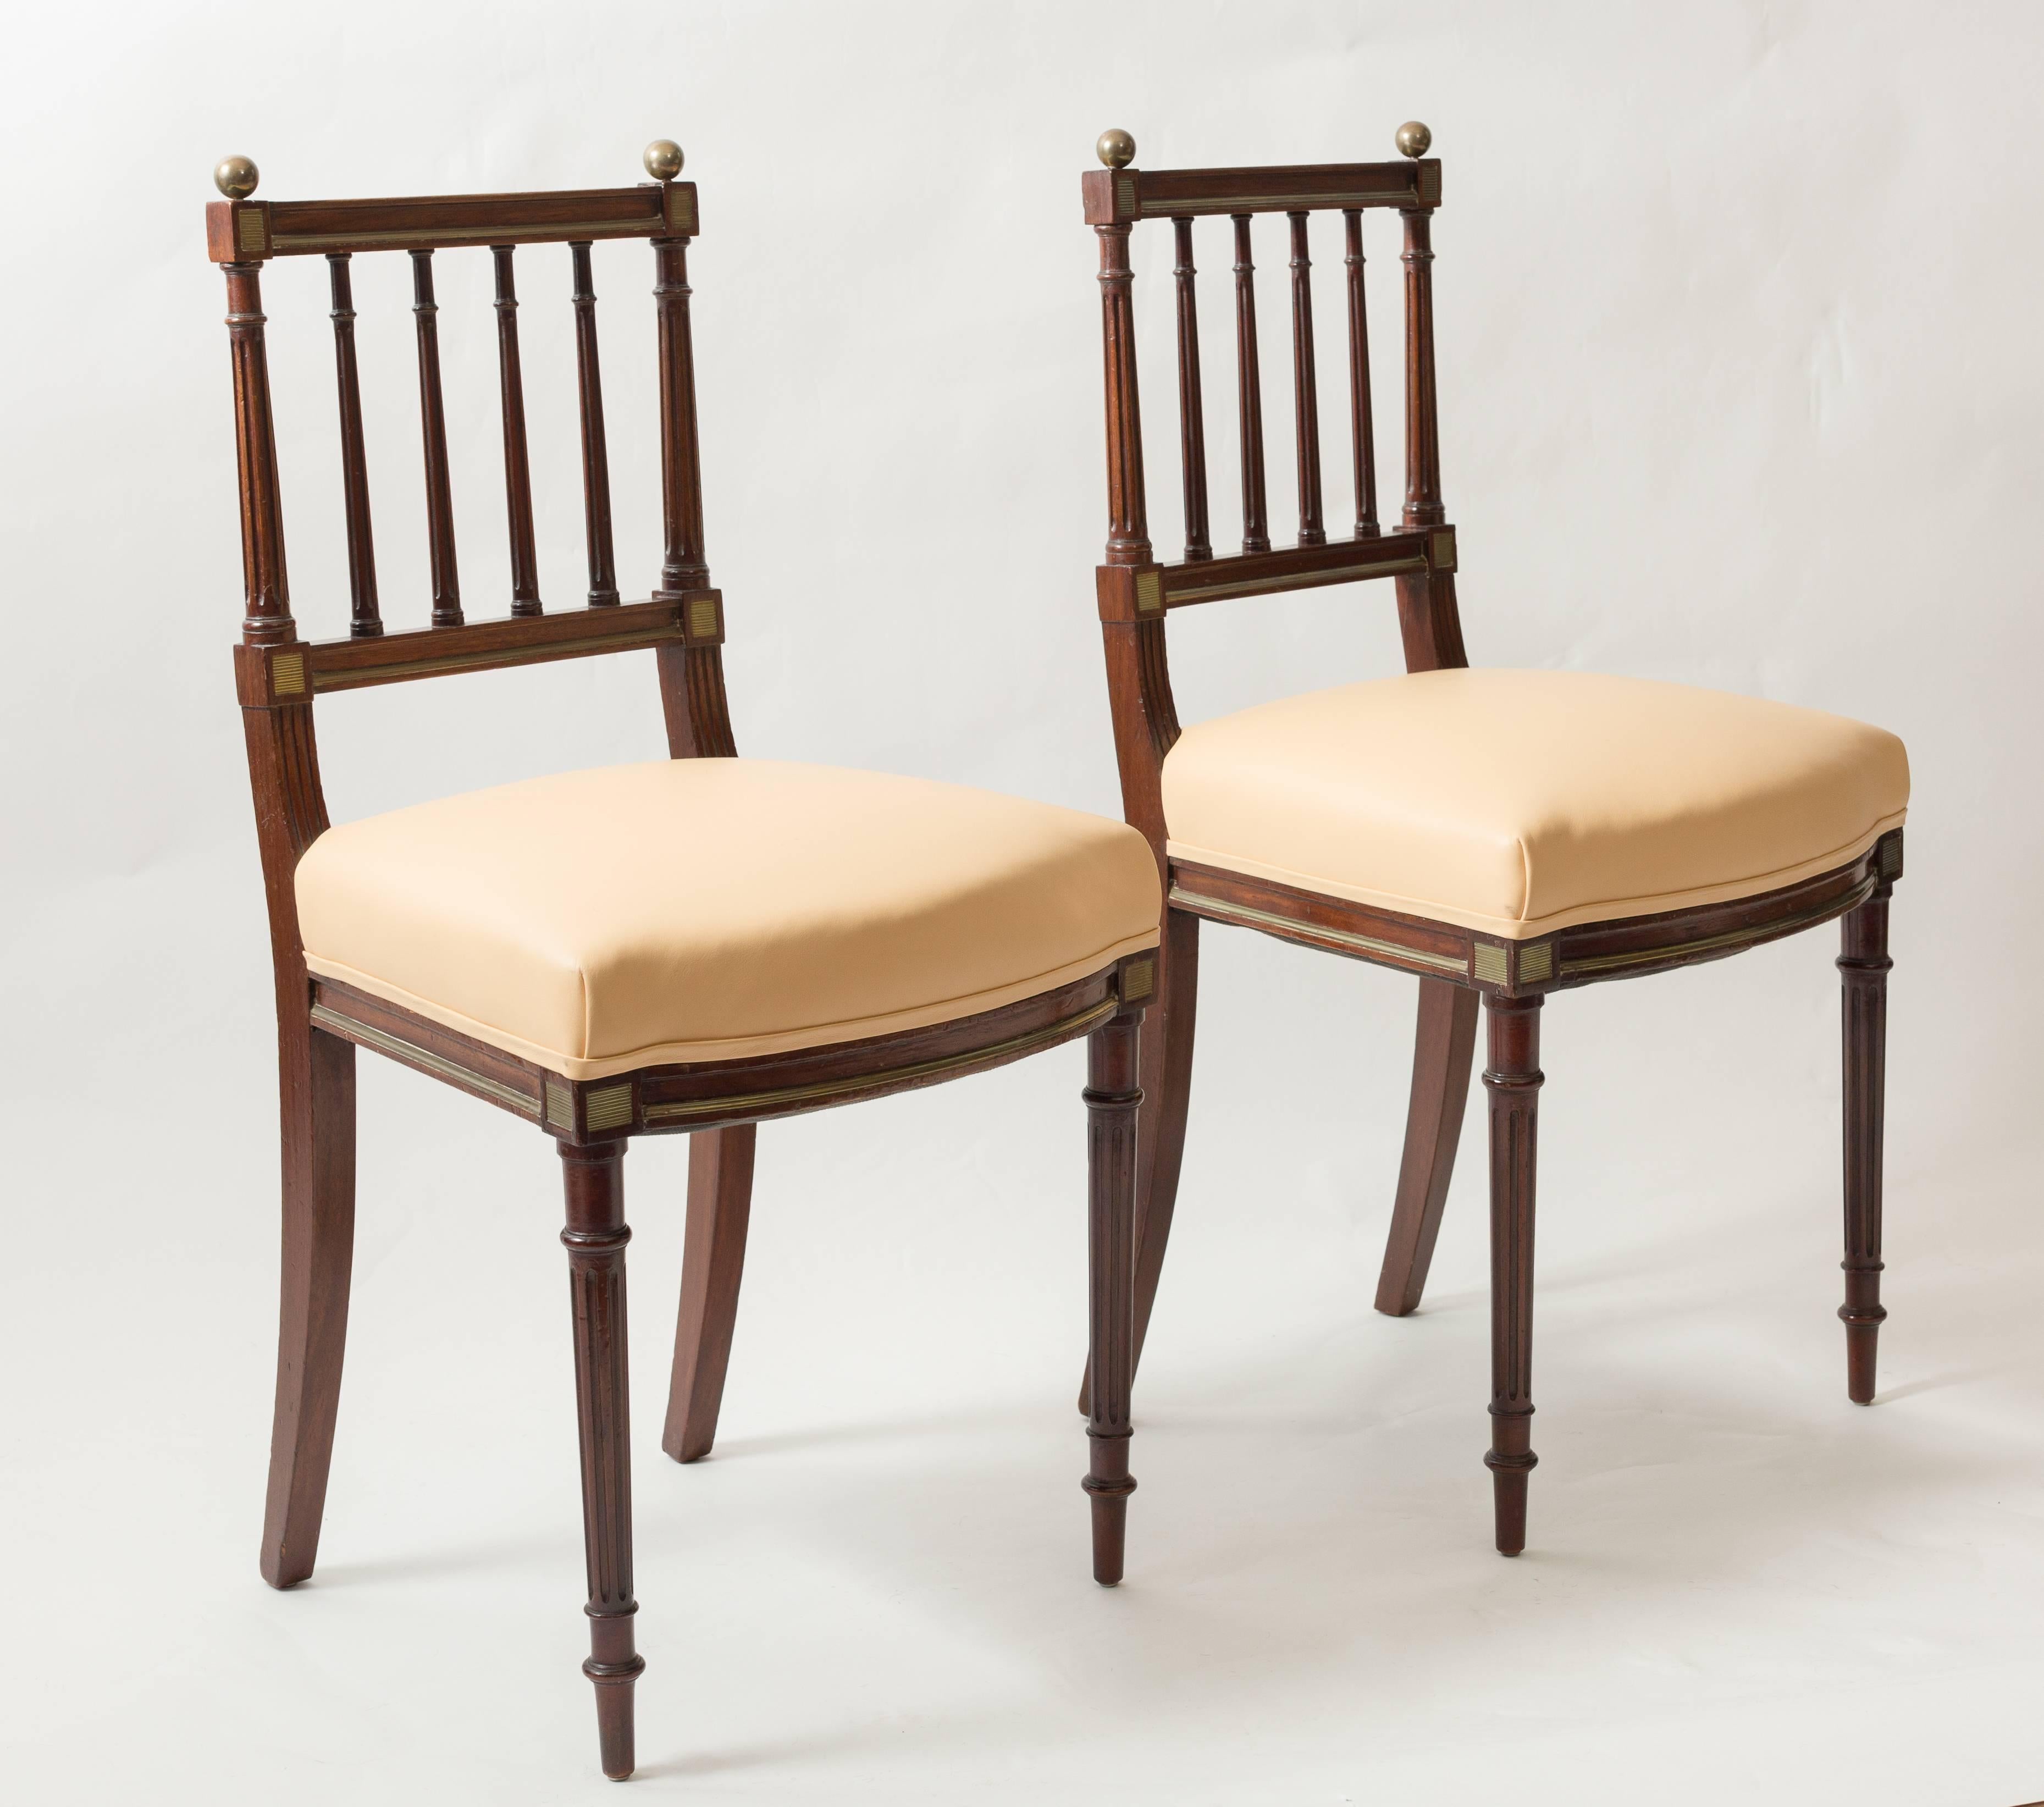 Classical in form, with gorgeous detail, these upholstered seats are well-made and in great condition!!